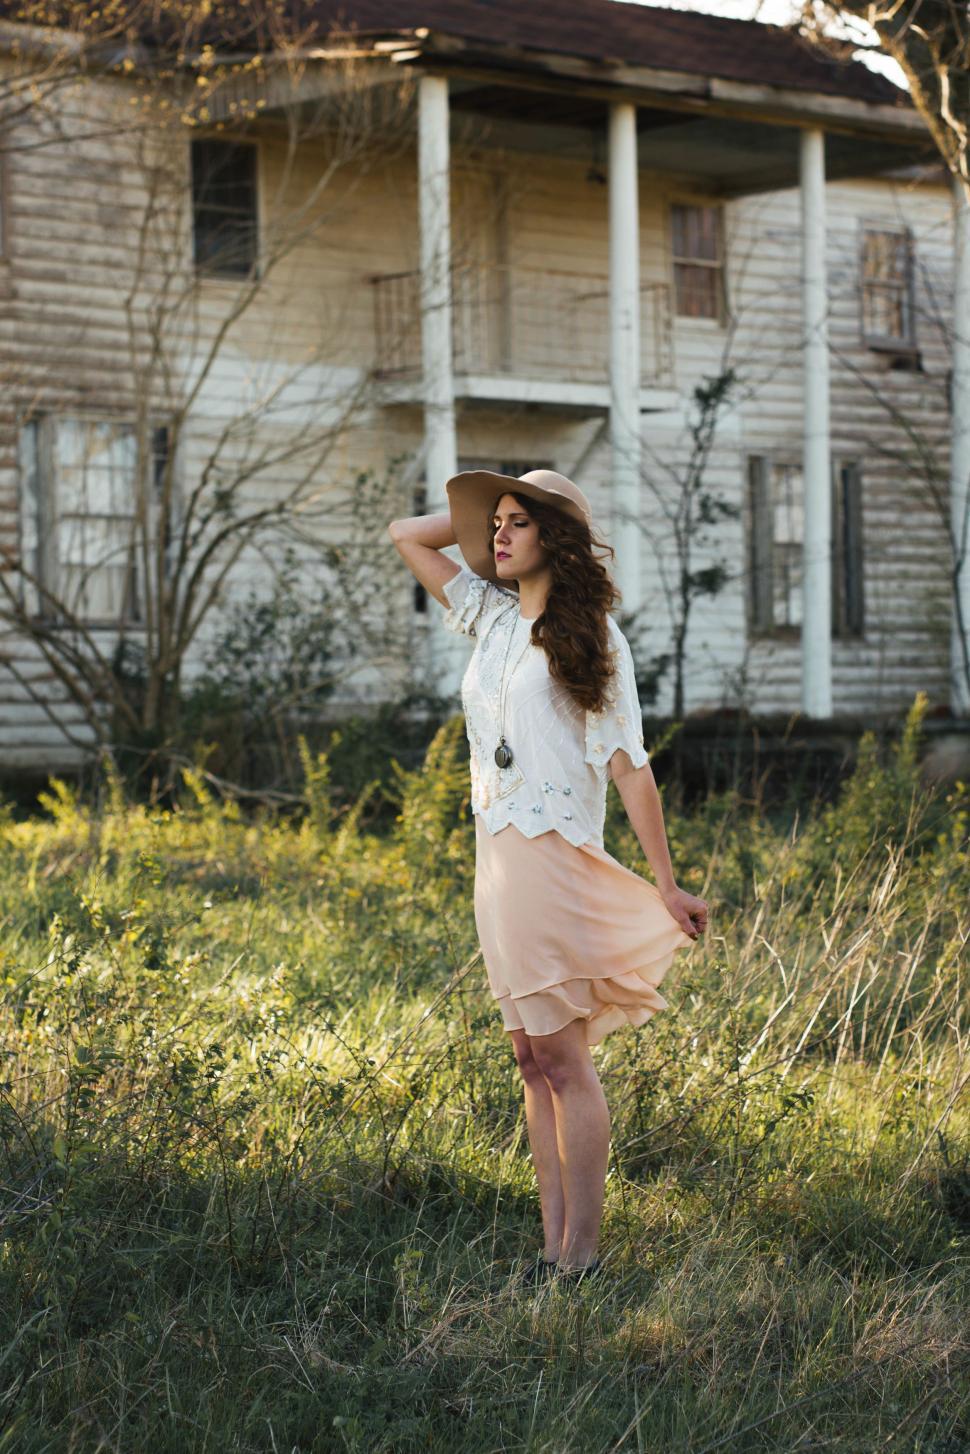 Free Image of Woman Standing in Front of Old House 